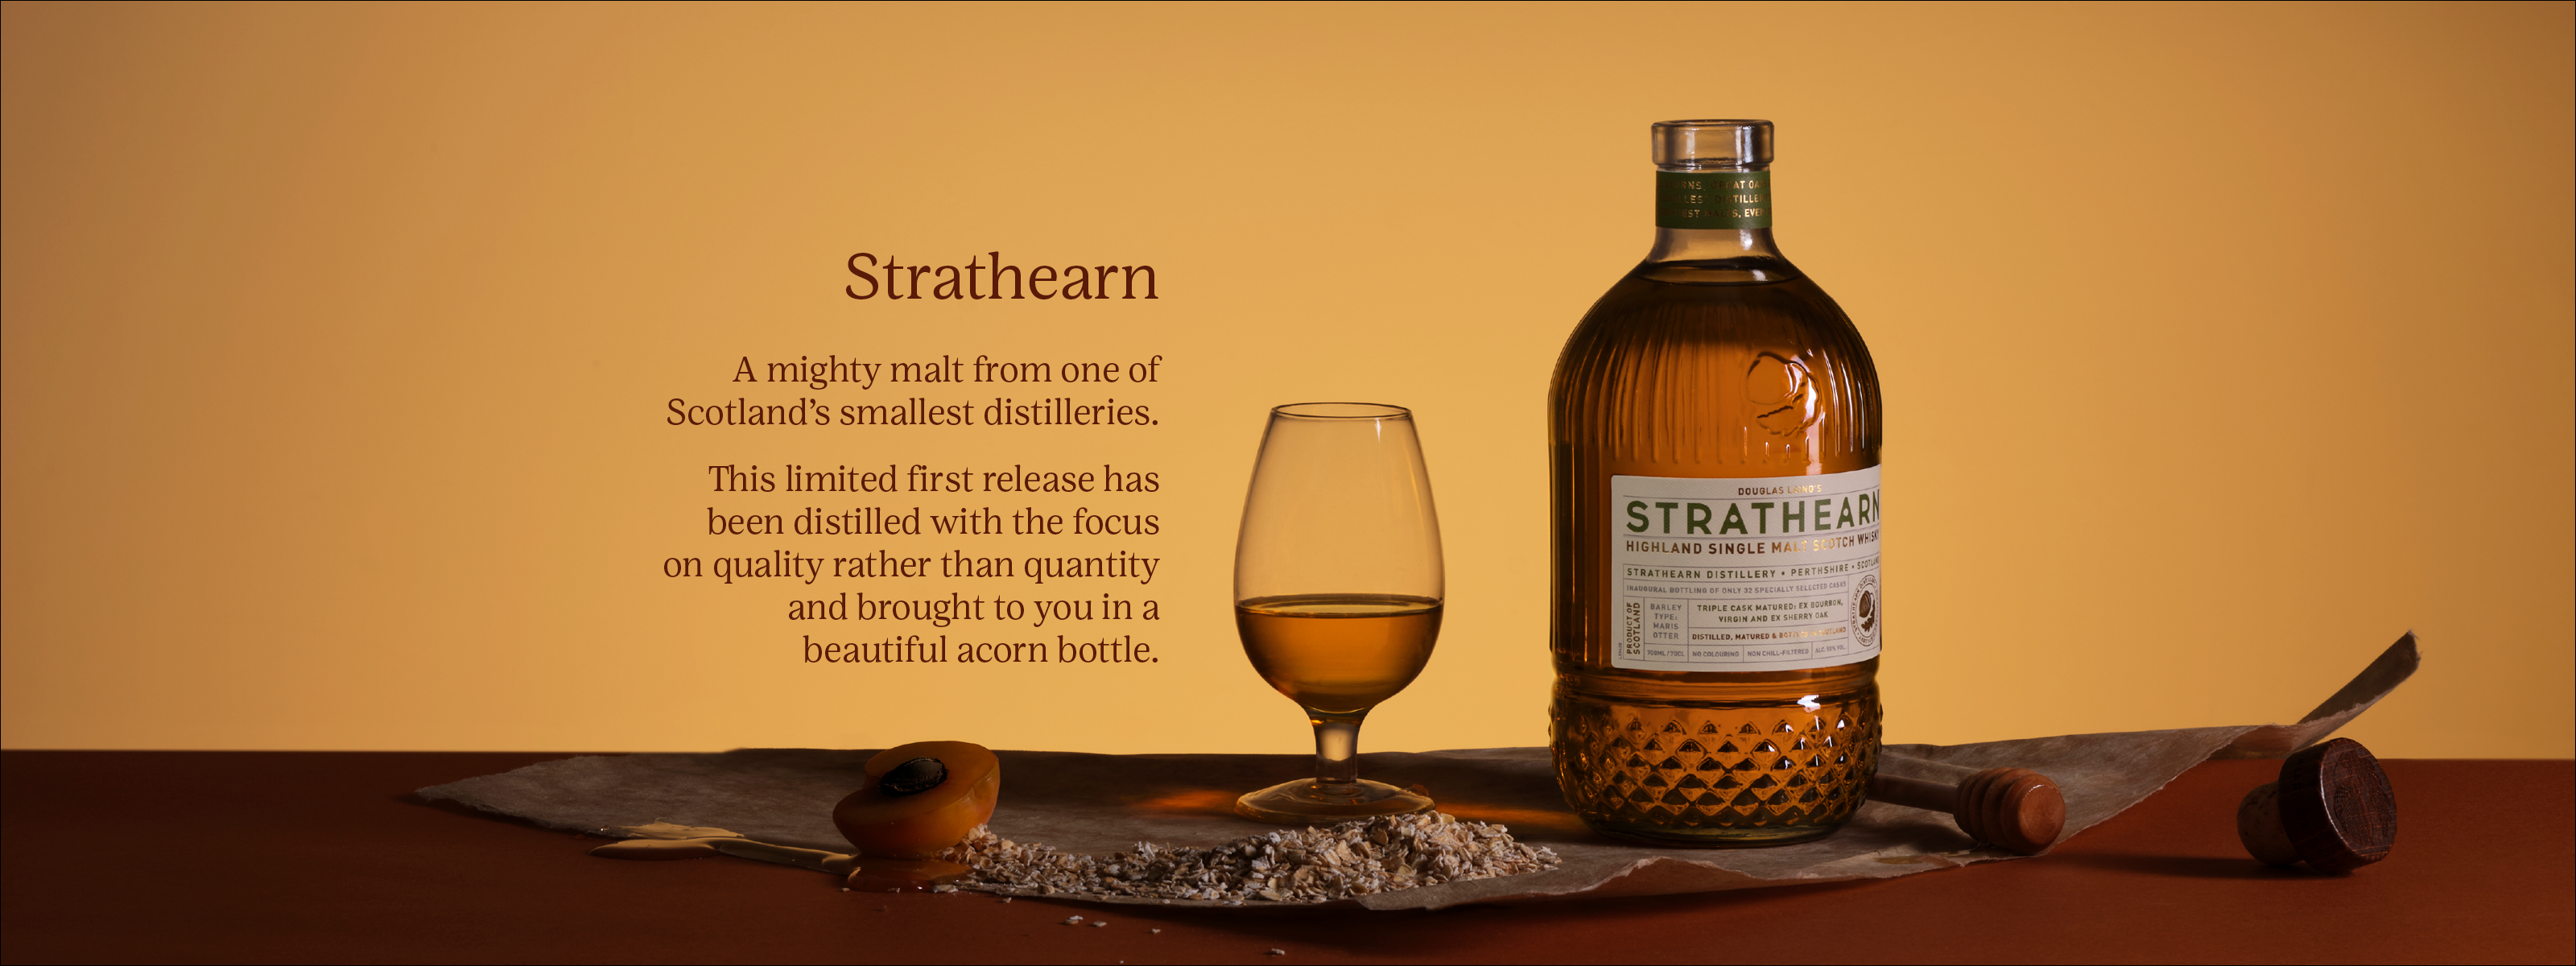 Photo of a bottle of Strathearn on a golden background with text - Strathearn A mighty malt from one of Scotland’s smallest distilleries. This limited first release has been distilled with the focus on quality rather than quantity and brought to you in a beautiful acorn bottle.